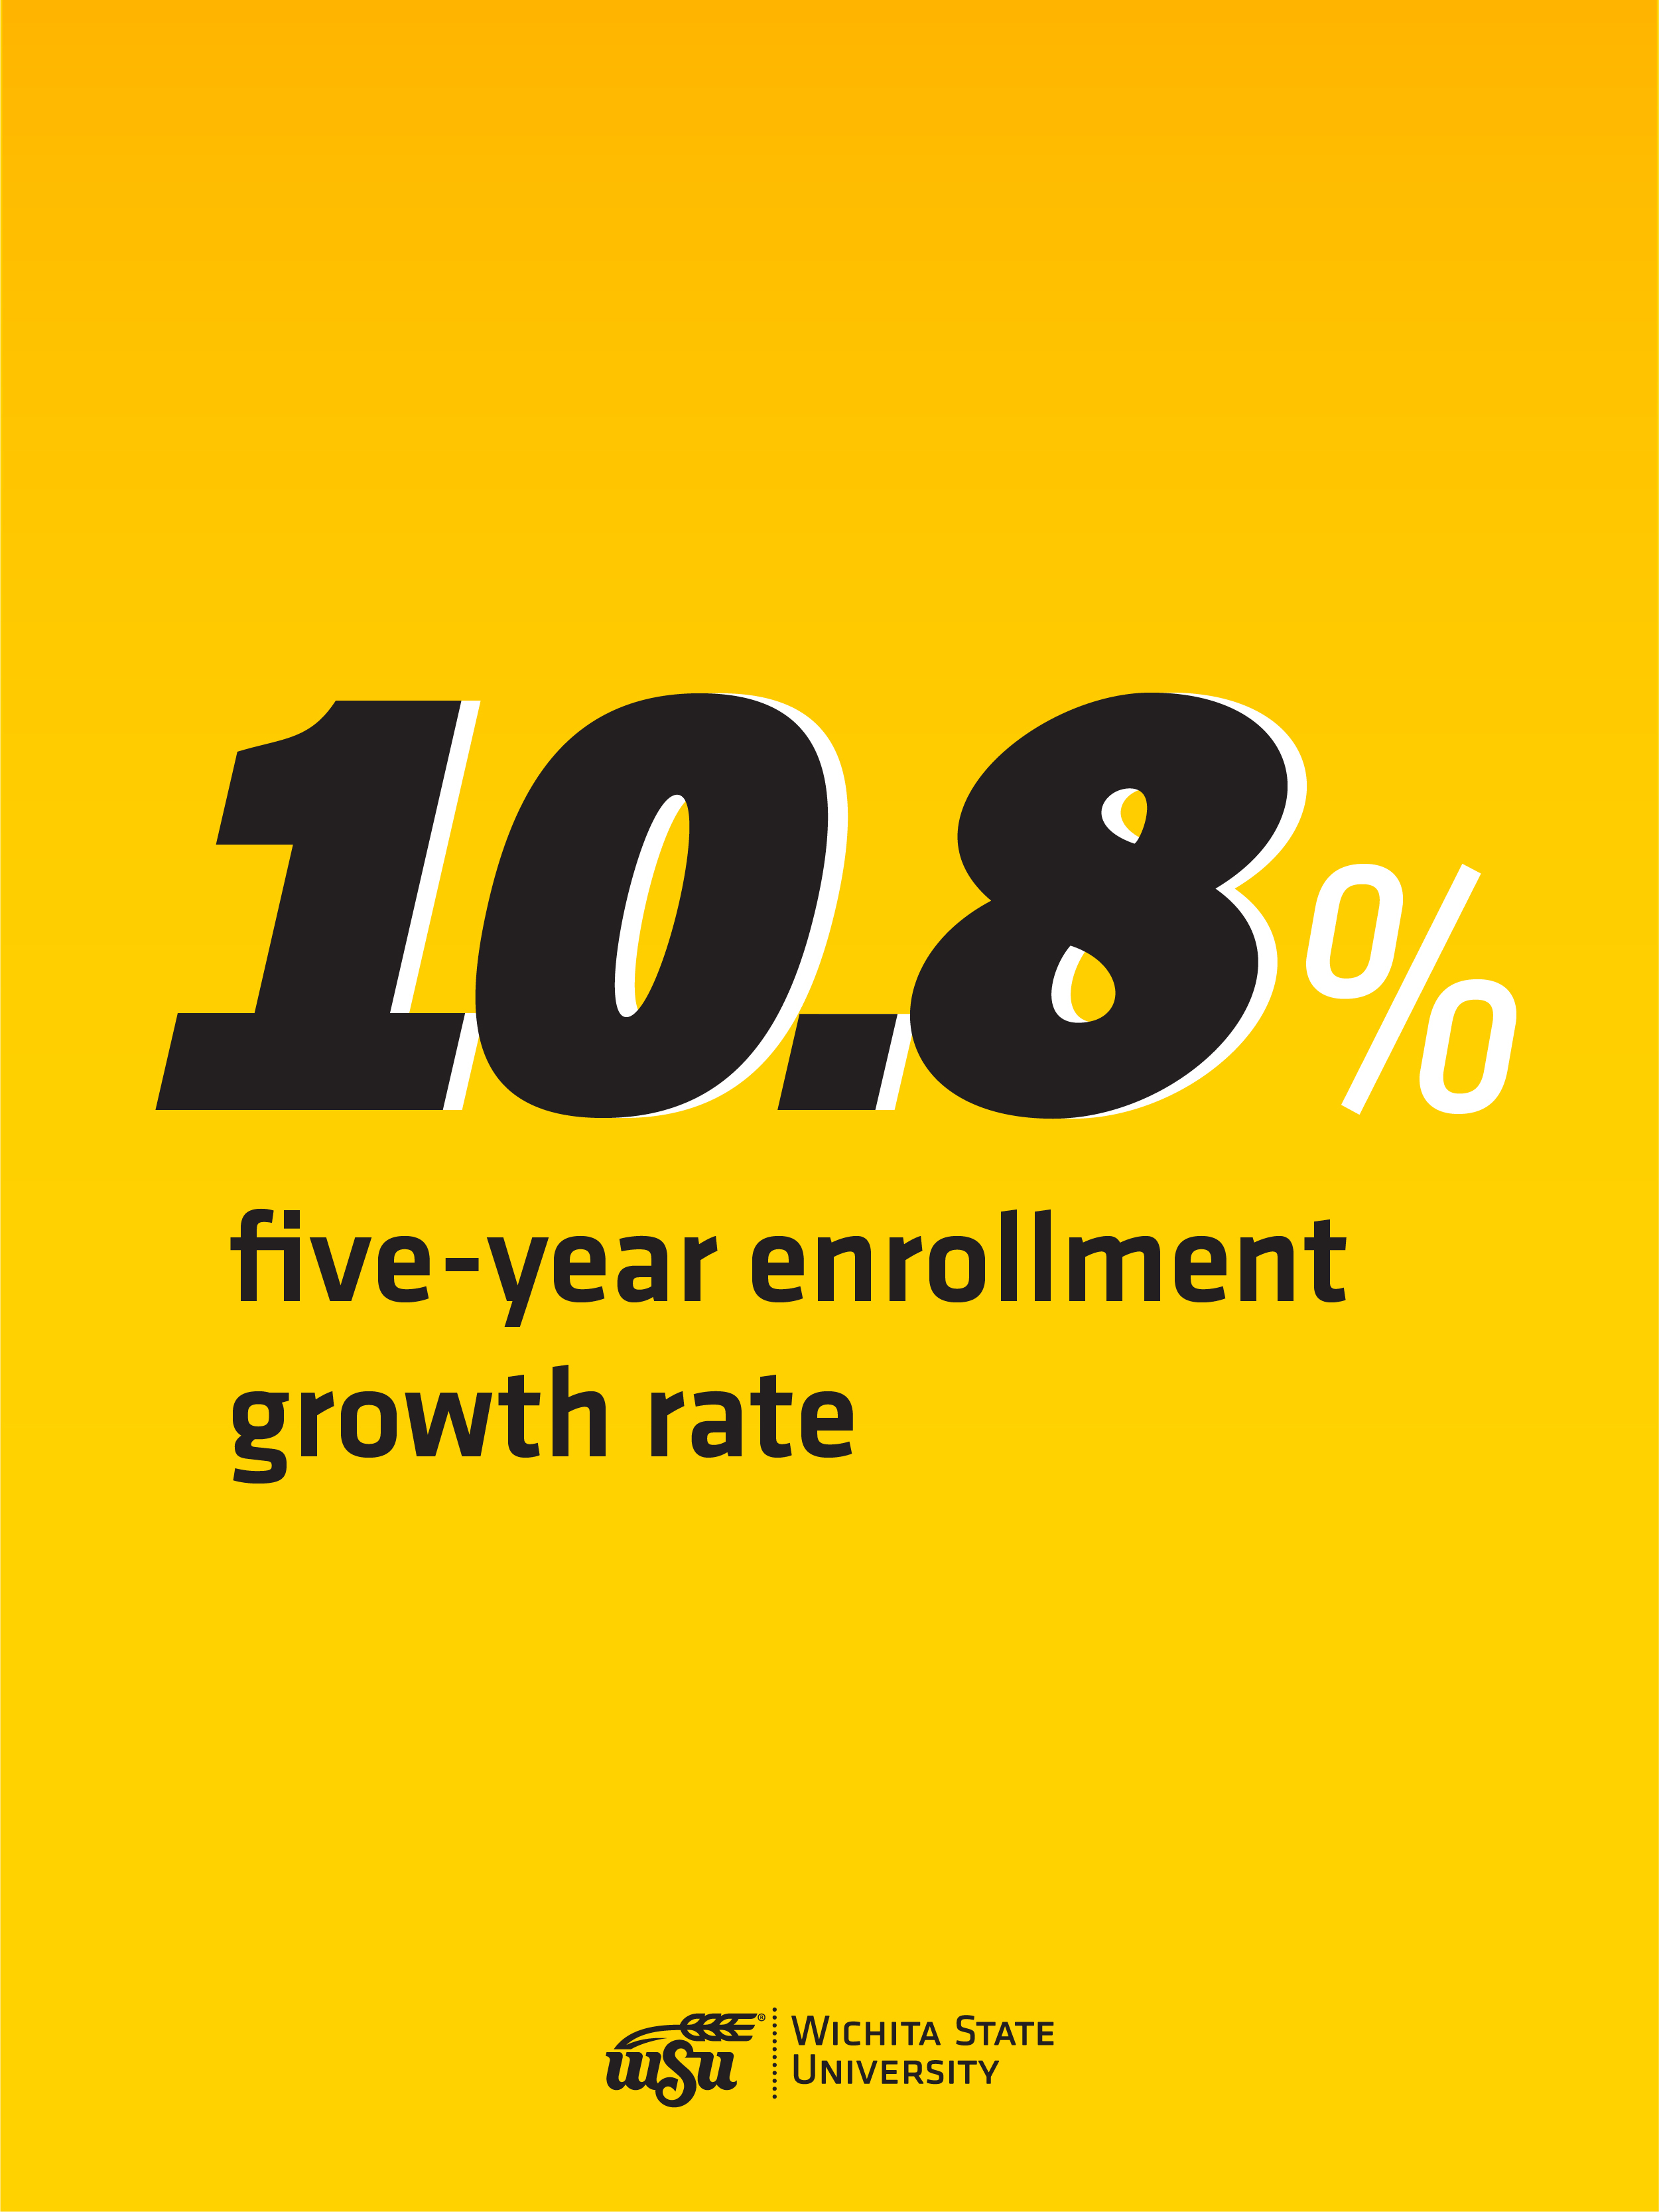 Infographic: 10.8 percent five-year enrollment growth rate